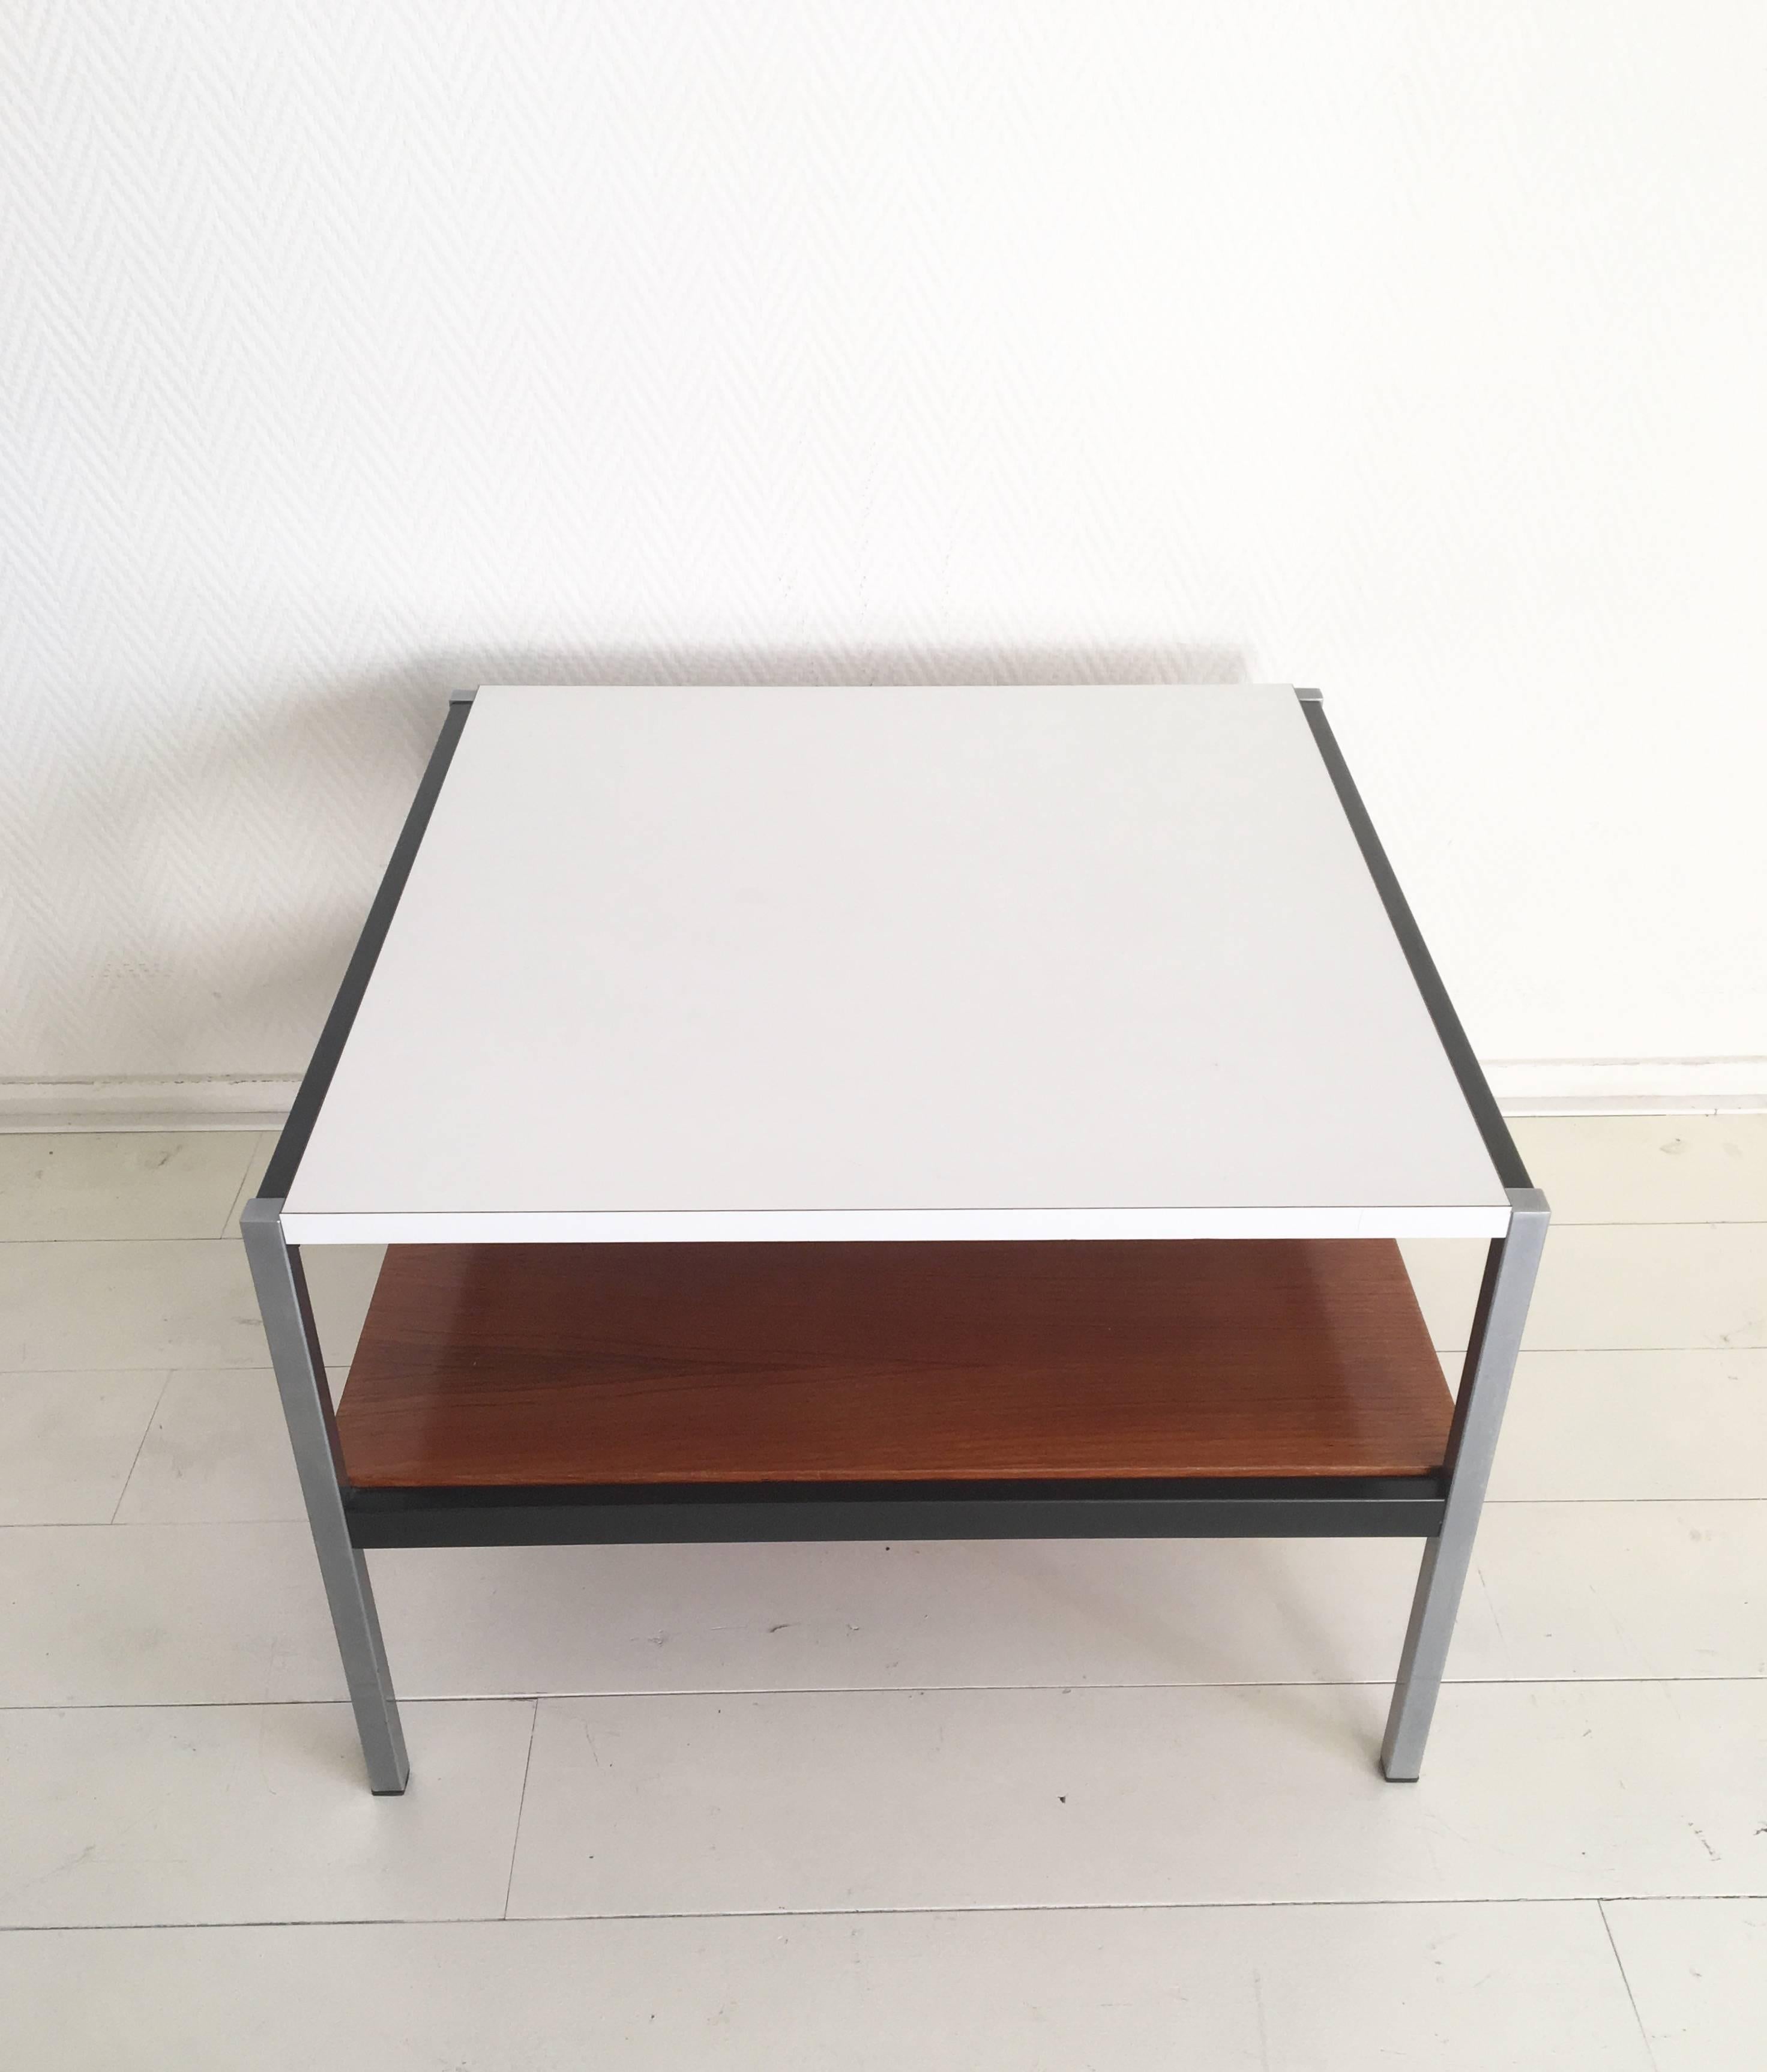 20th Century Minimalist Coffee Table by Coen de Vries for Gispen, 1960s